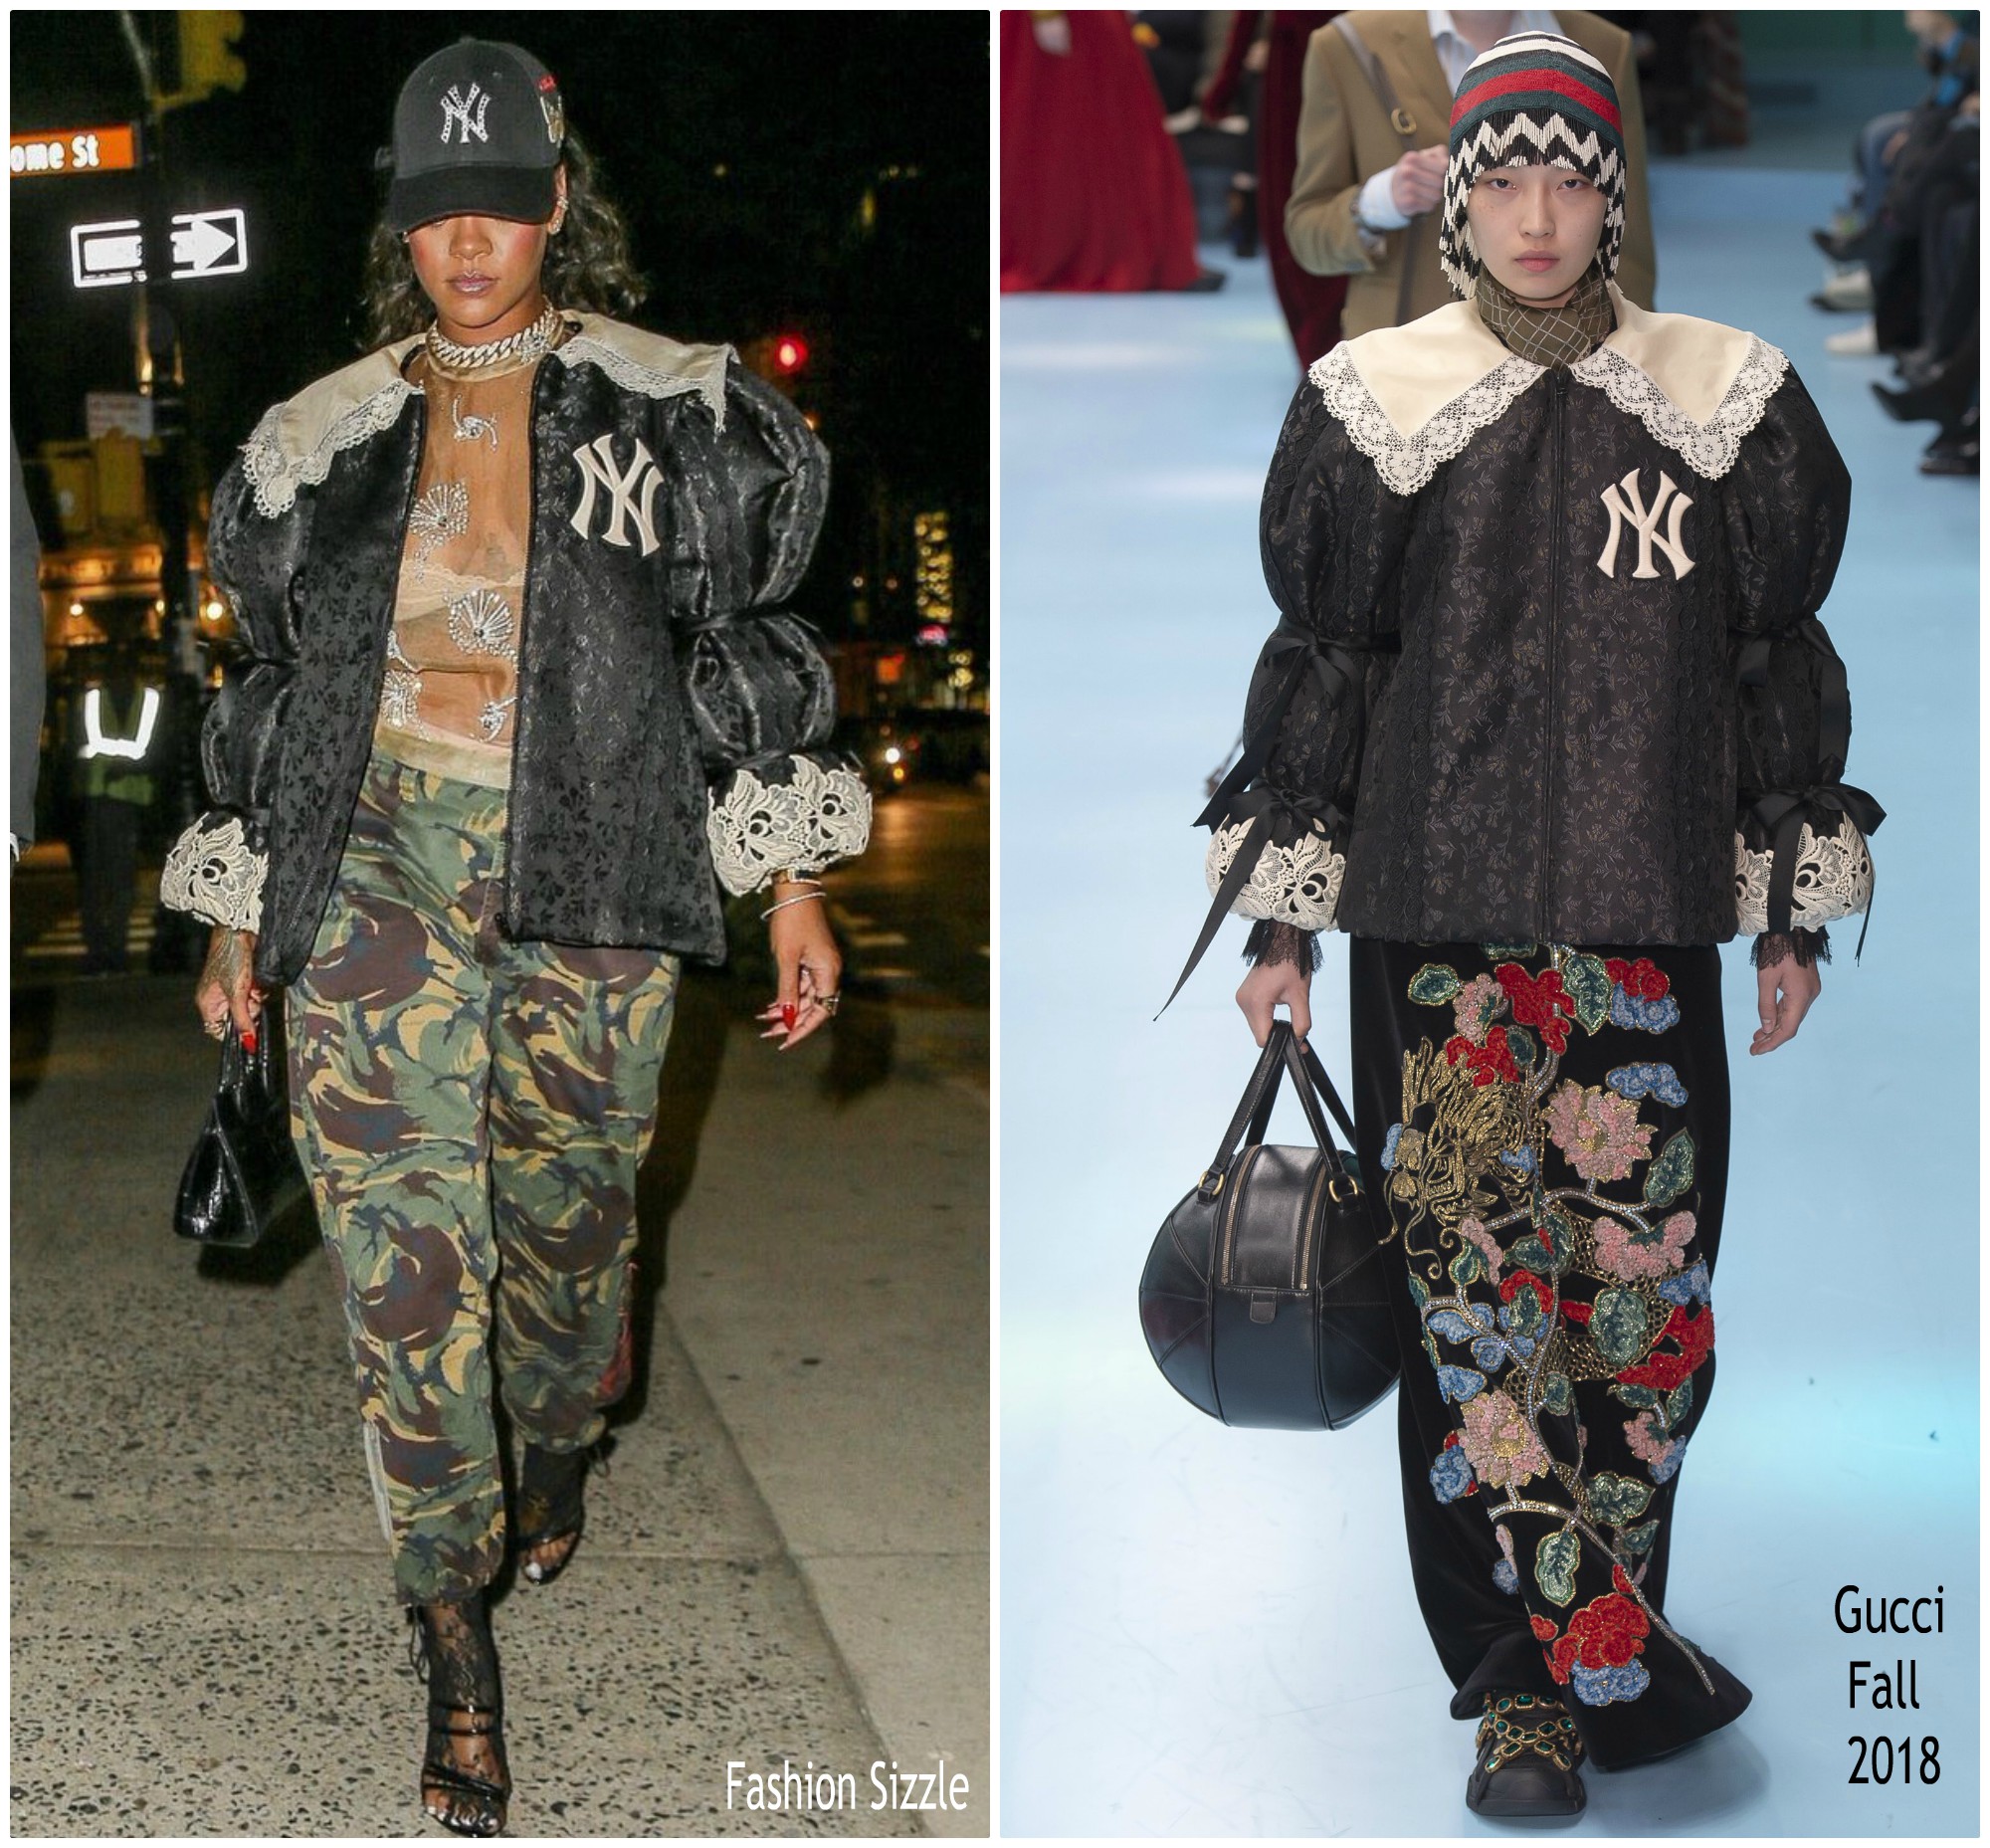 Rihanna In Gucci @ Gucci Store Opening In New York City